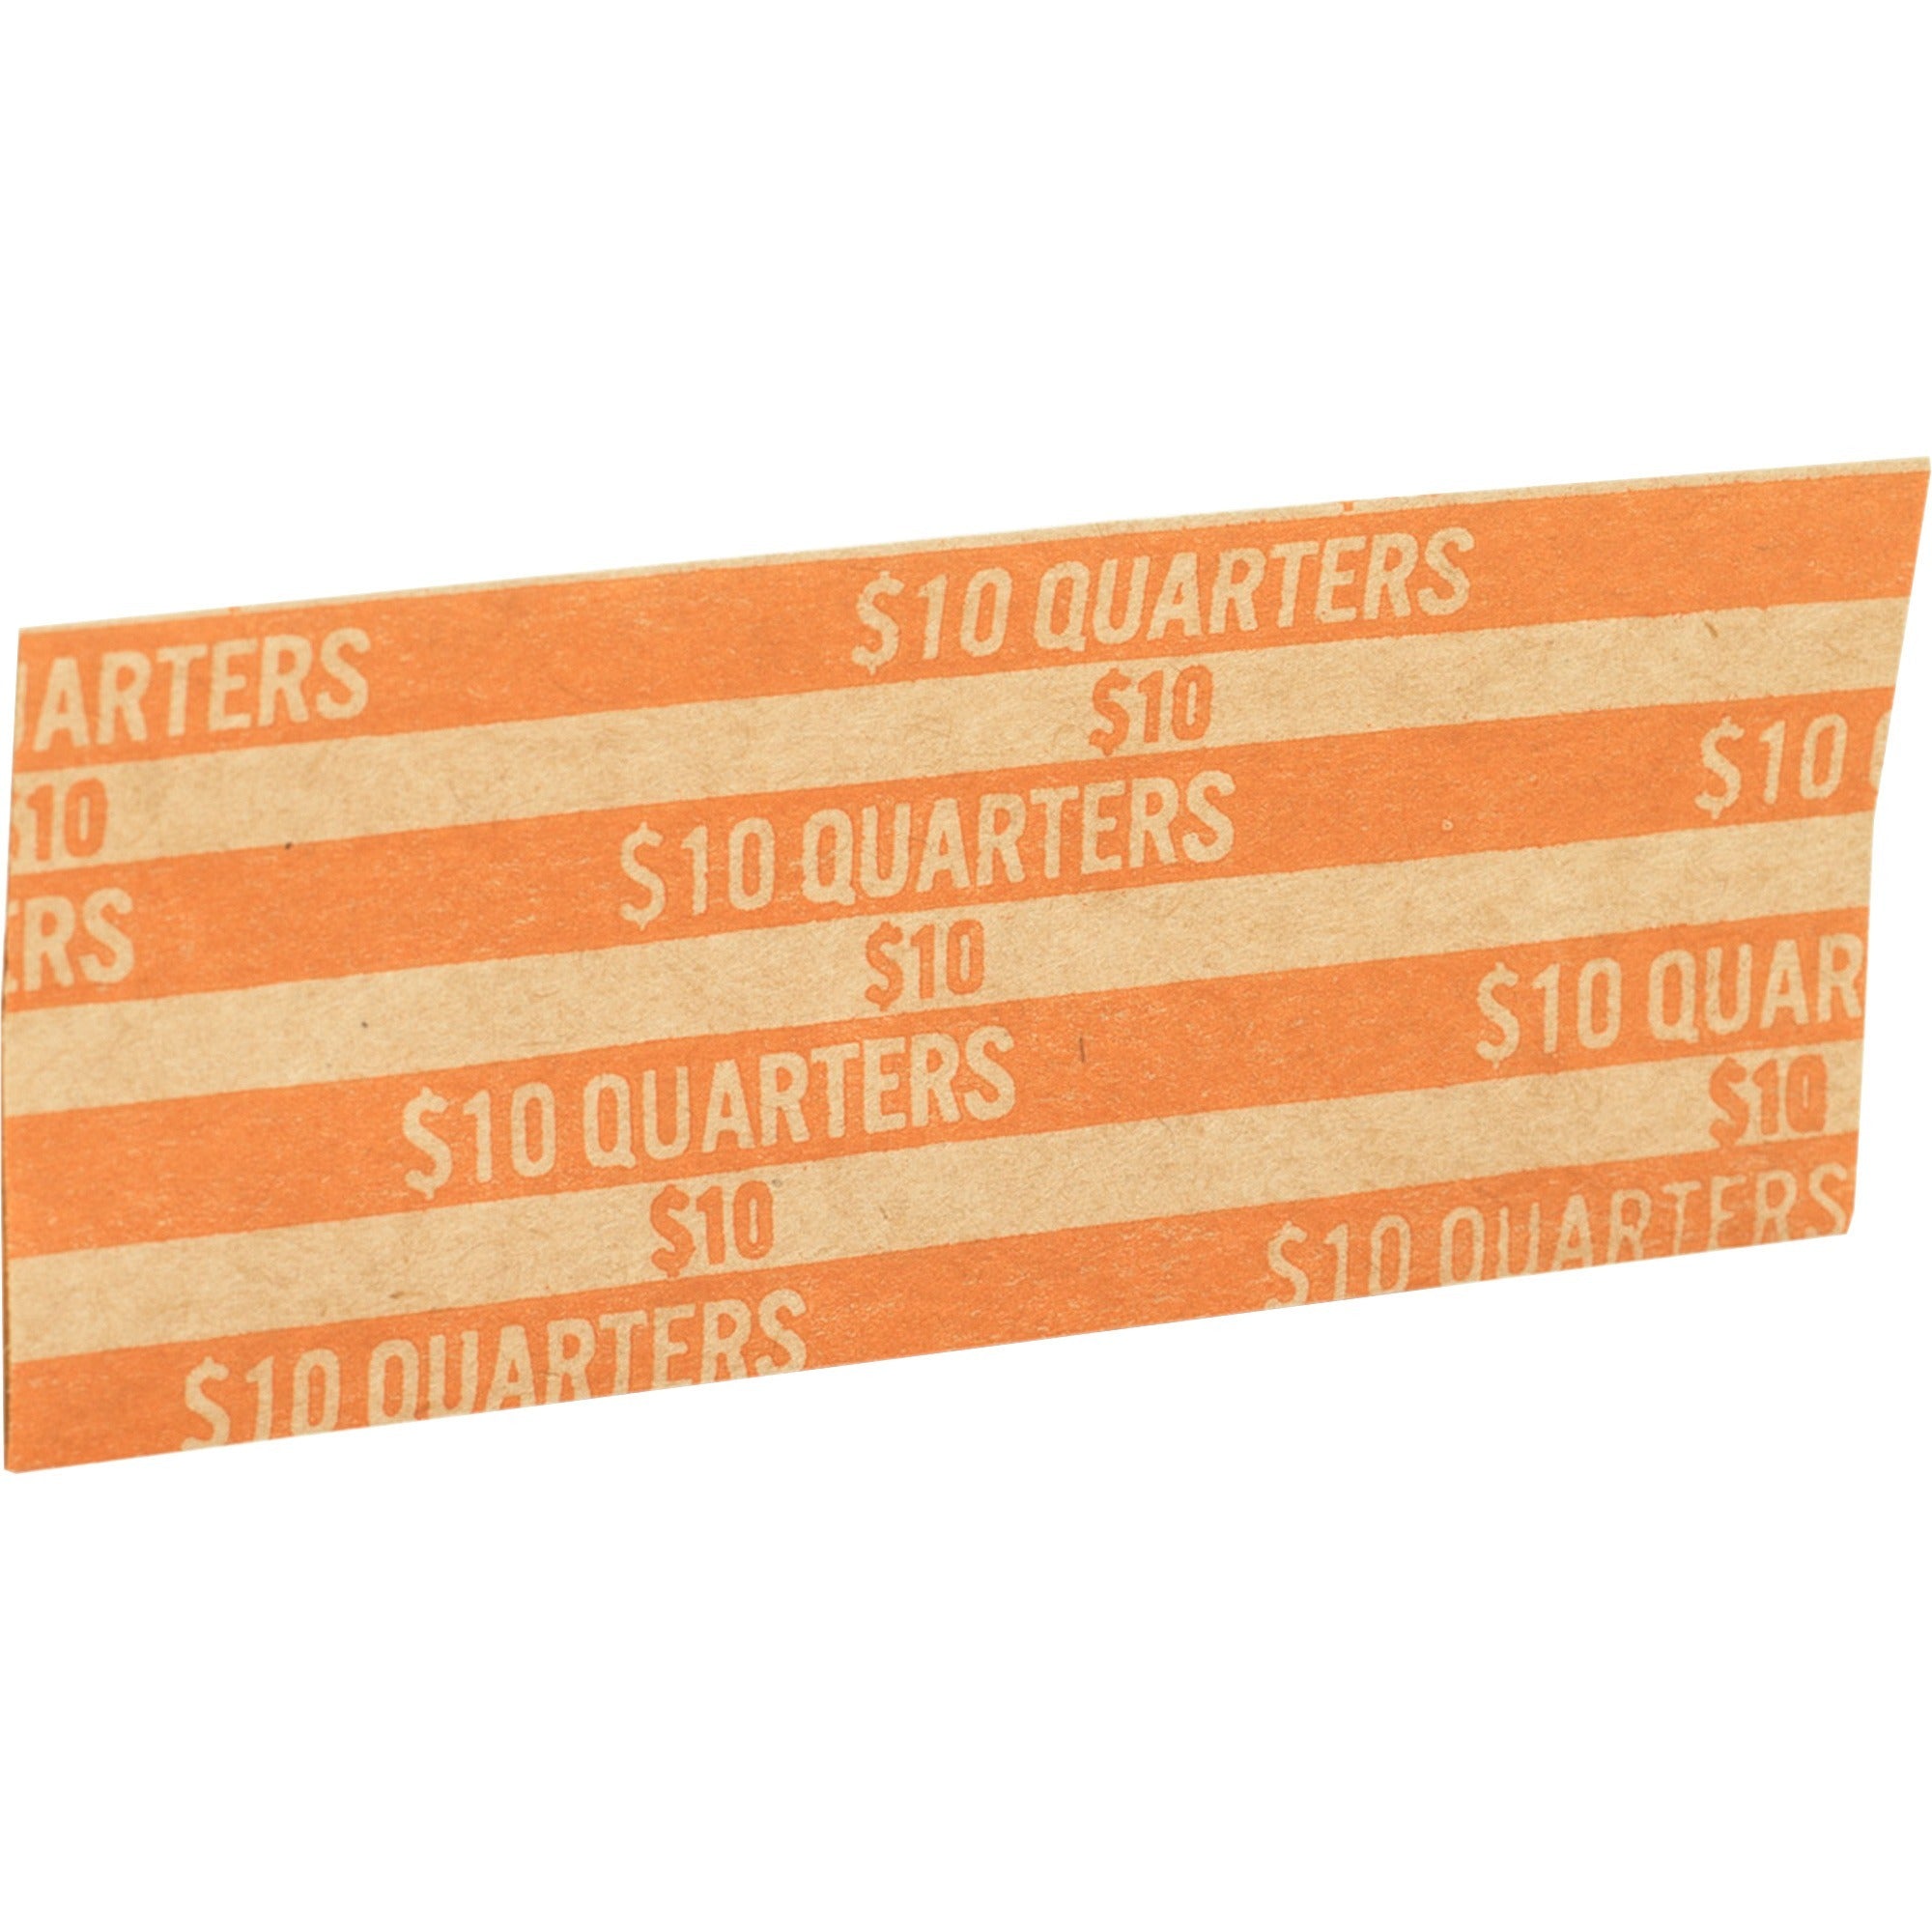 Sparco Flat Coin Wrappers - 1000 Wrap(s)Total $10 in 40 Coins of 25 Denomination - 60 lb Basis Weight - Kraft - Orange - 1000 / Pack - 